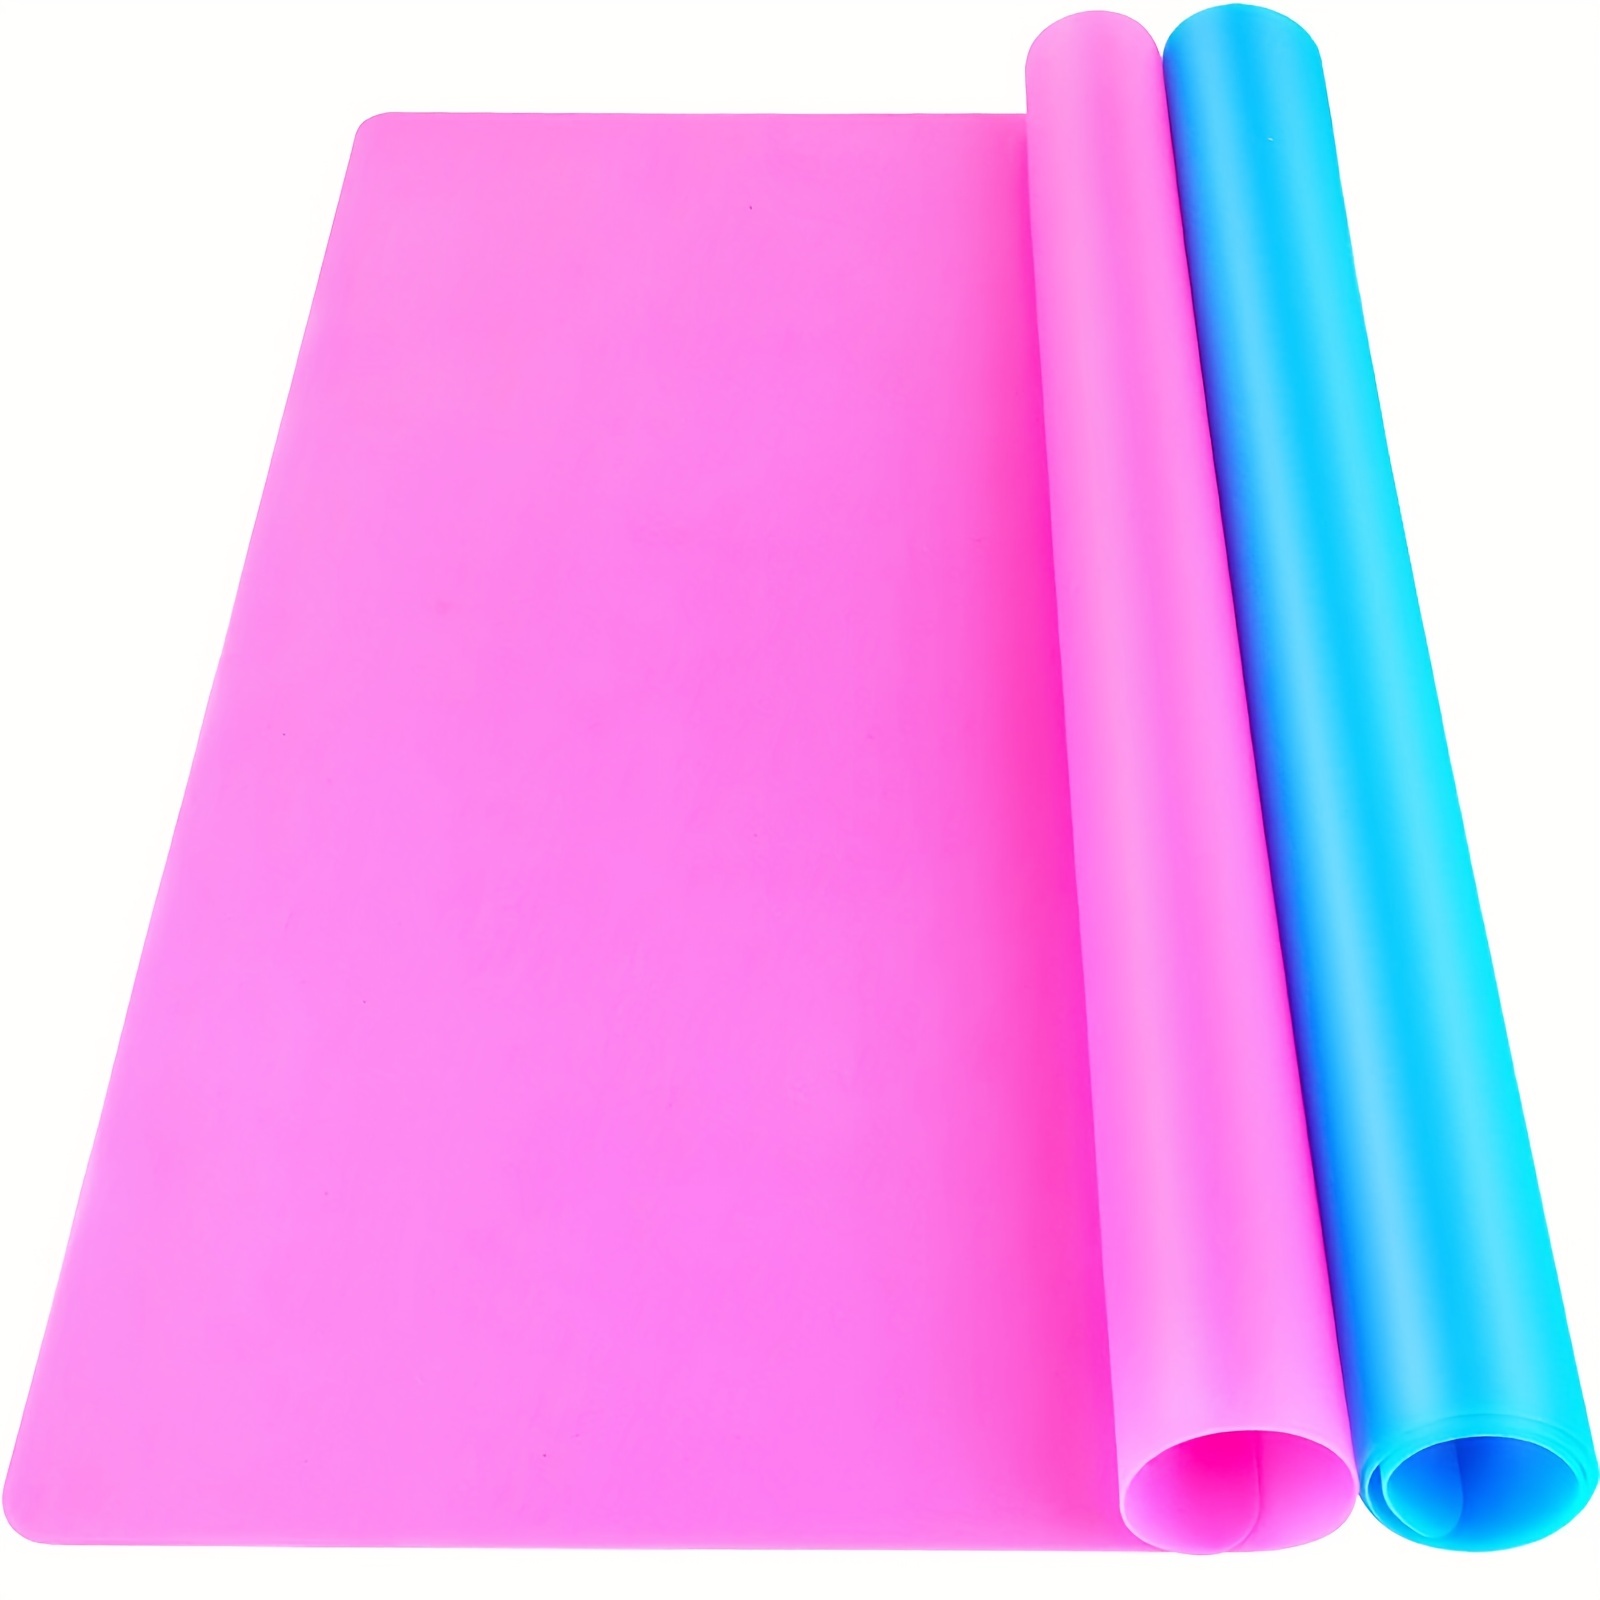 Large Silicone Mat for Crafts, 23.415.6 Silicone Sheet for Resin Molds,  Clay Mat, Paint Mat, Pastry Mat, Placemat, Silicone Mat for Epoxy Resin,  Nail Art, Craft Glitter Tumbler Making, Translucent Translucent Common